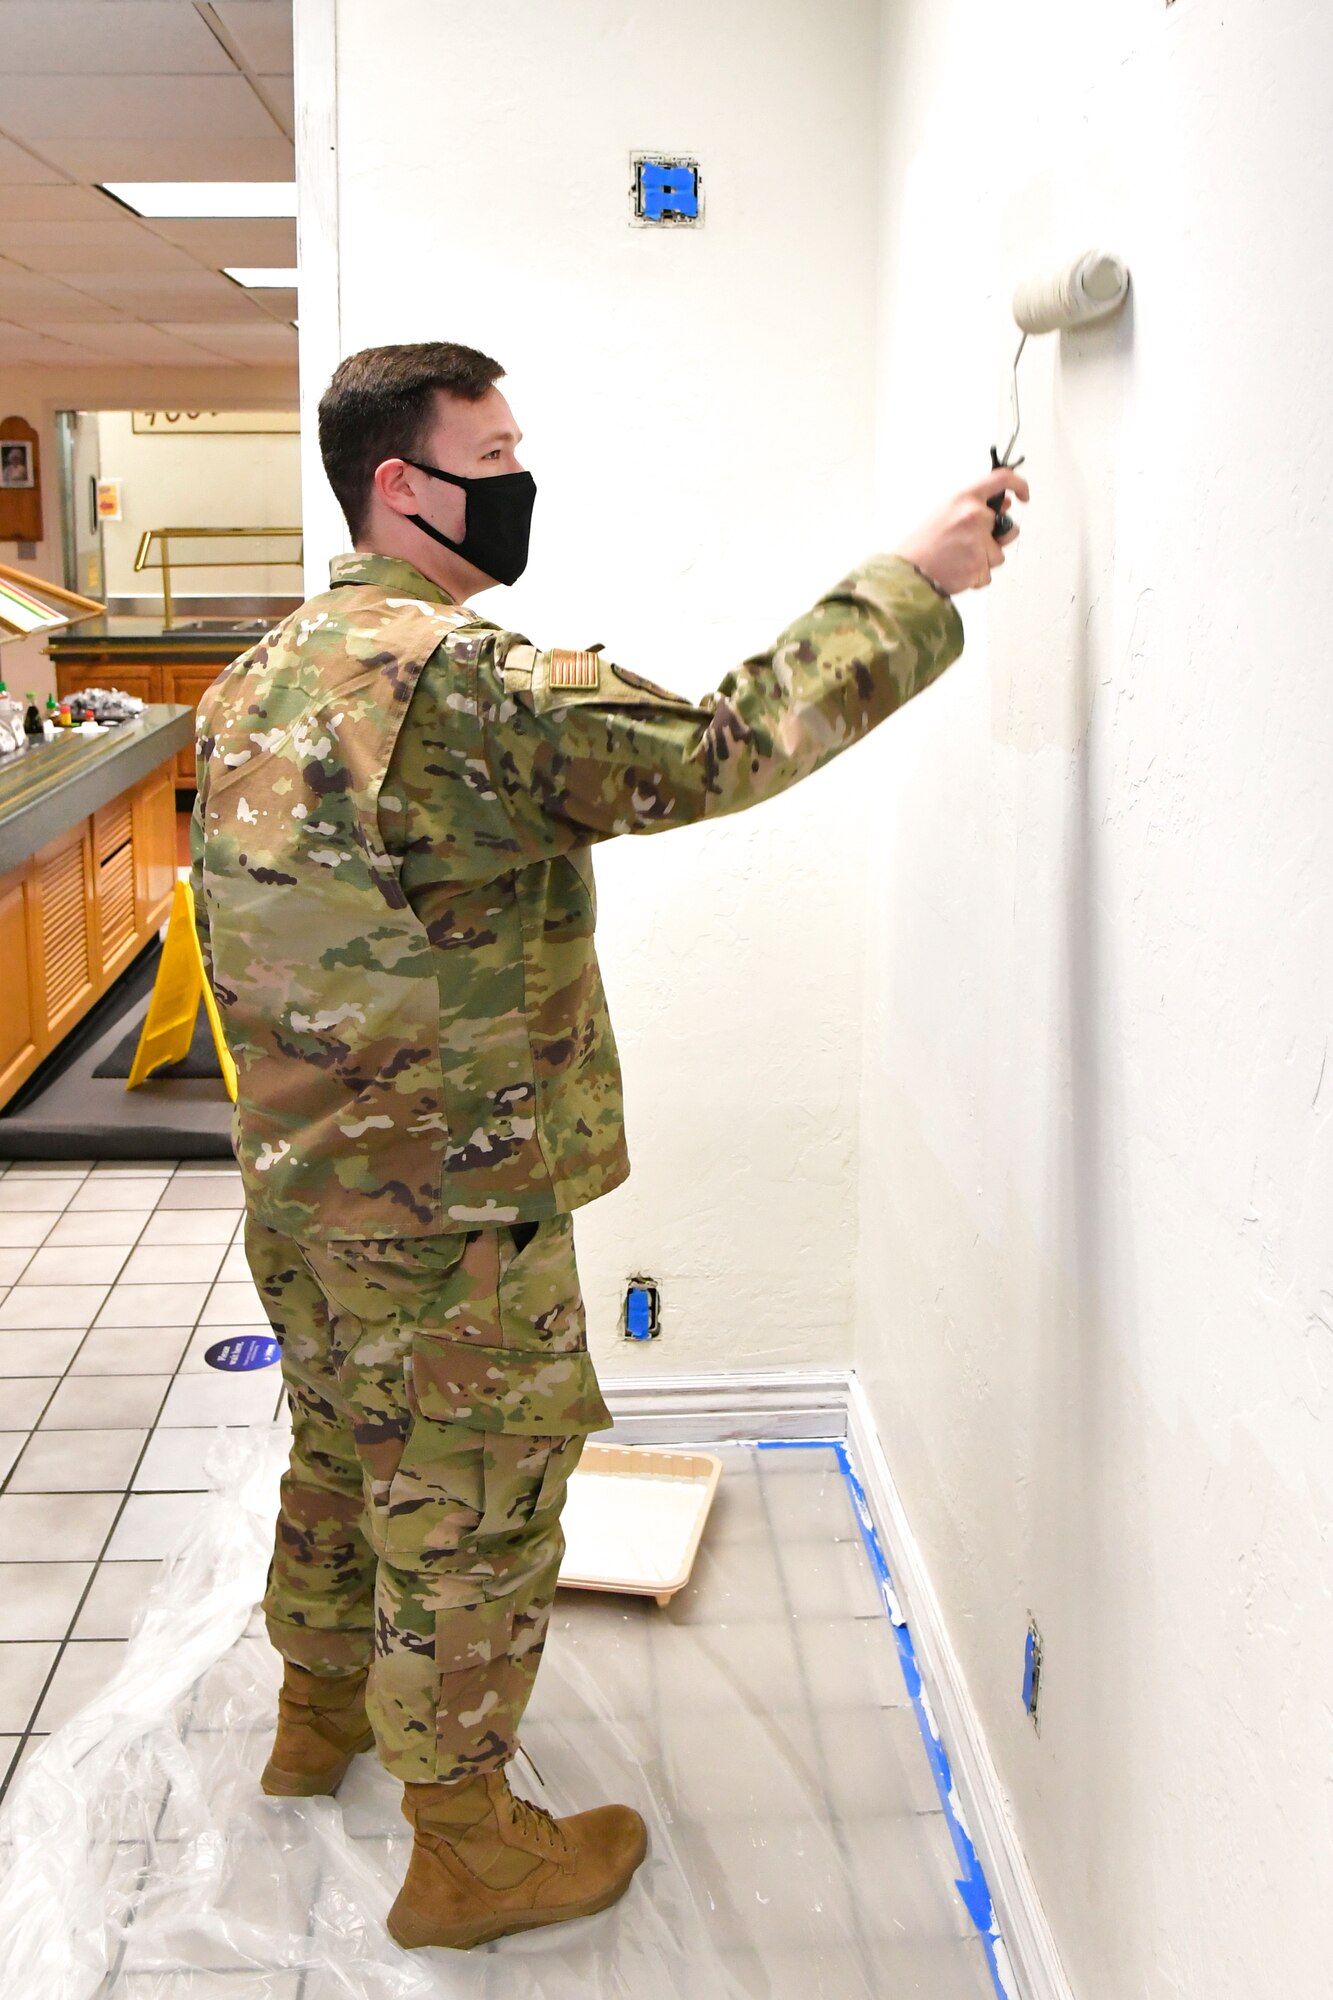 Airman 1st Class Dawson Sigetti, 75th Force Support Squadron, paints the interior of a dining facility Oct. 27, 2020, during a self-help renovation project on Hill Air Force Base, Utah. The DFAC facelift work is being accomplished by food service staff and many volunteer Airman from various squadrons across the base. (U.S. Air Force photo by Todd Cromar)